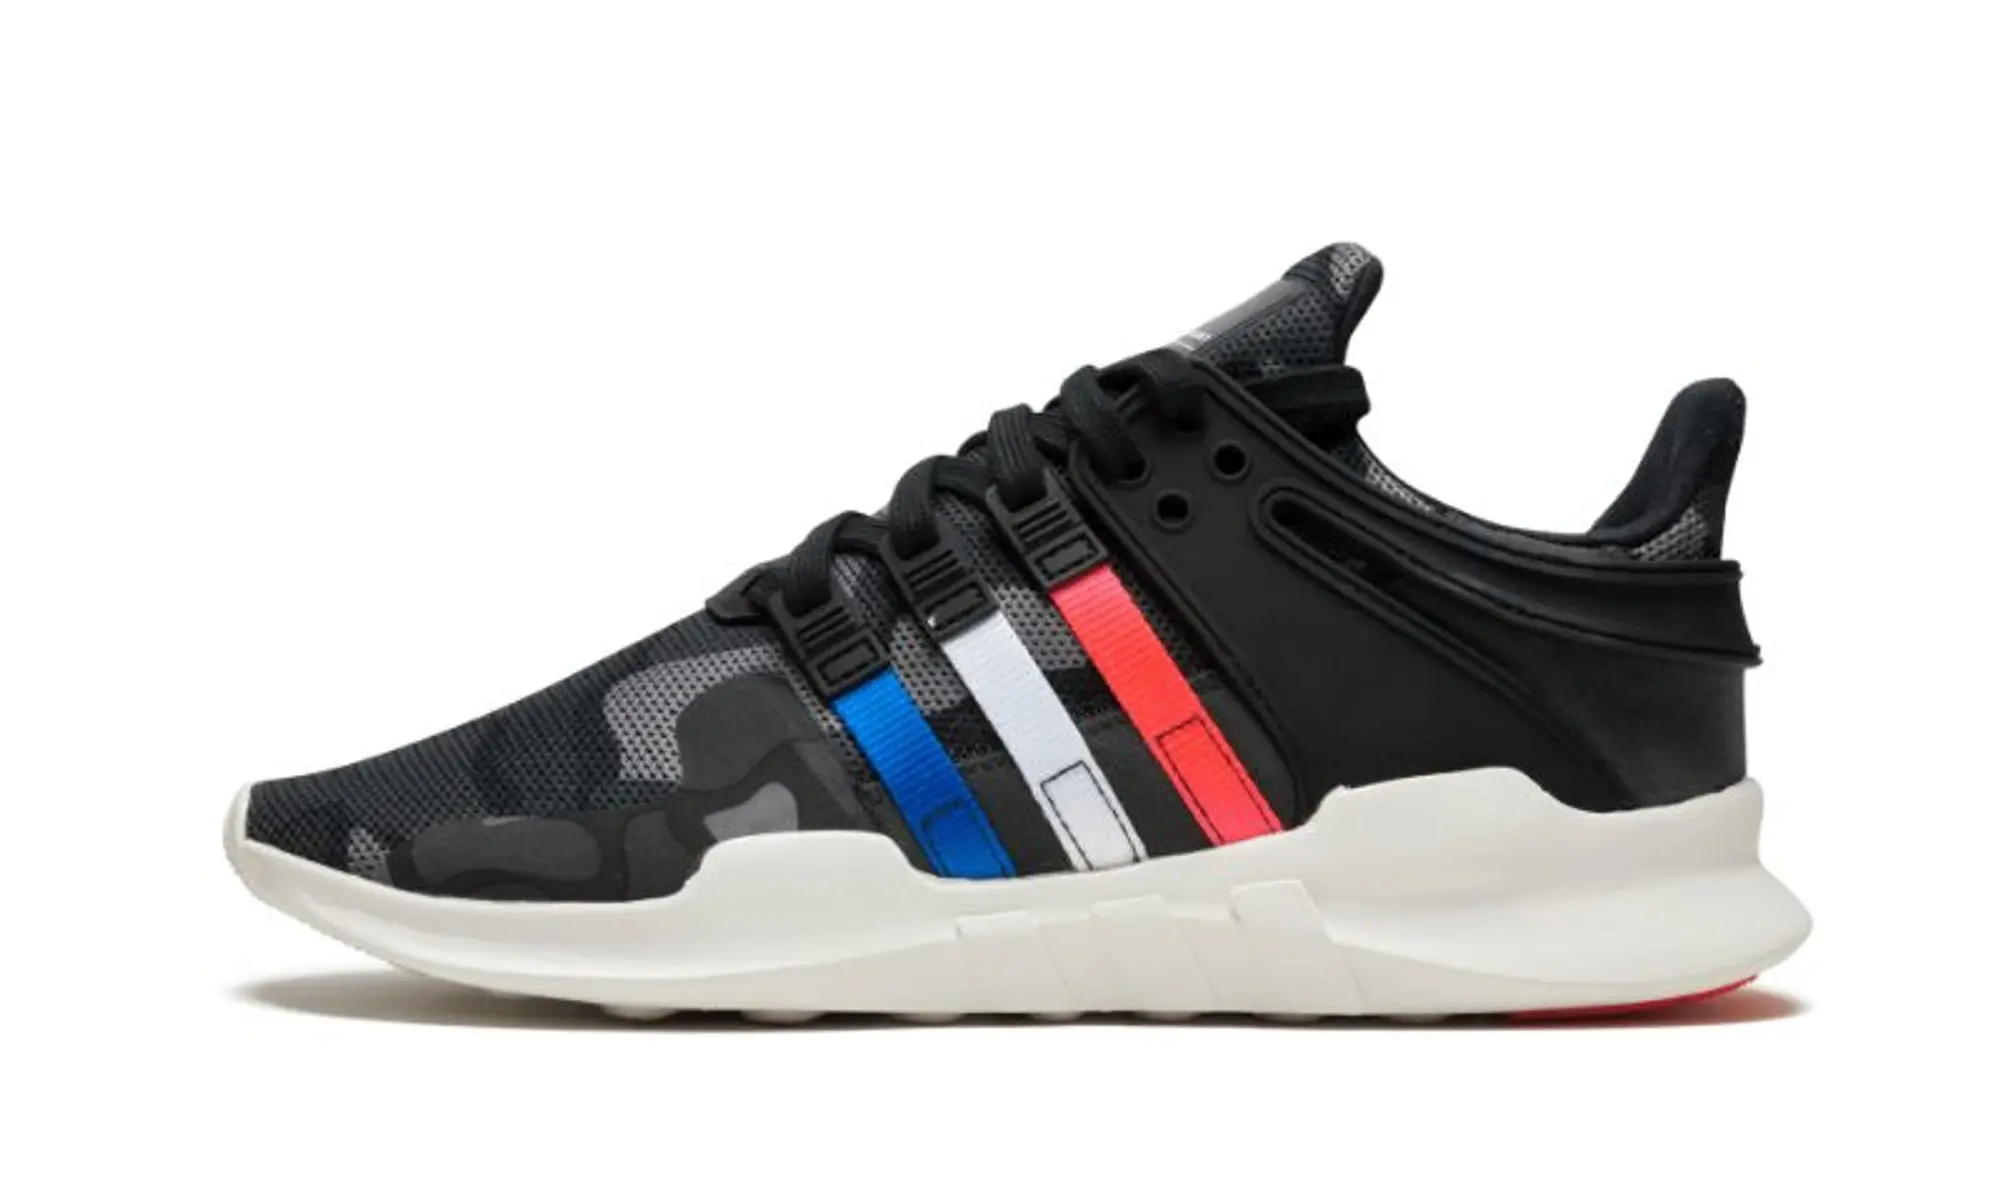 adidas EQT Support ADV Shoes